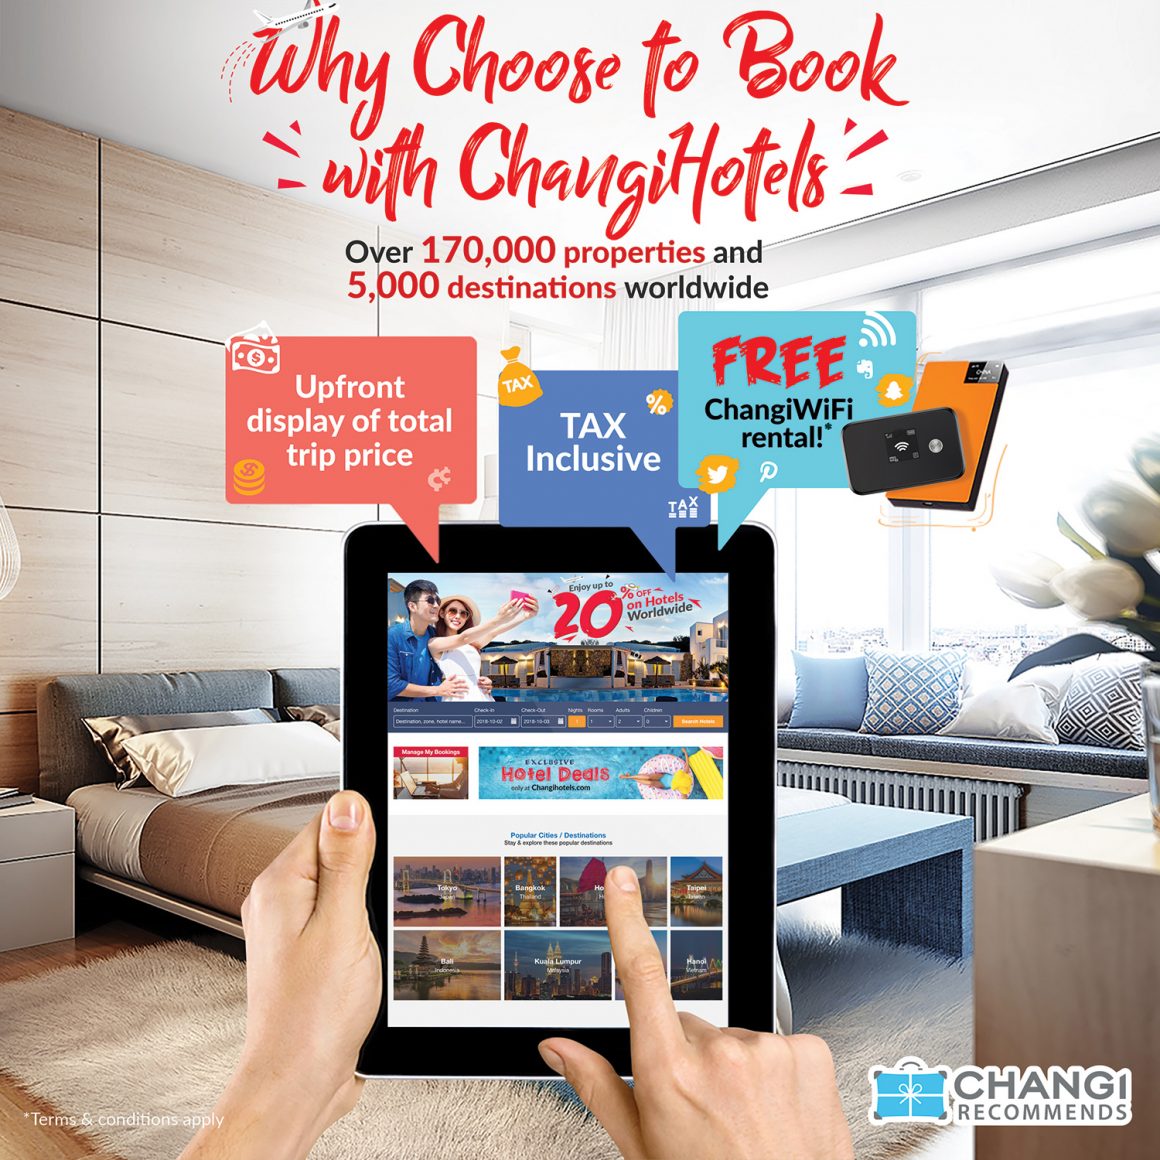 Changi Recommends introduces ChangiHotels